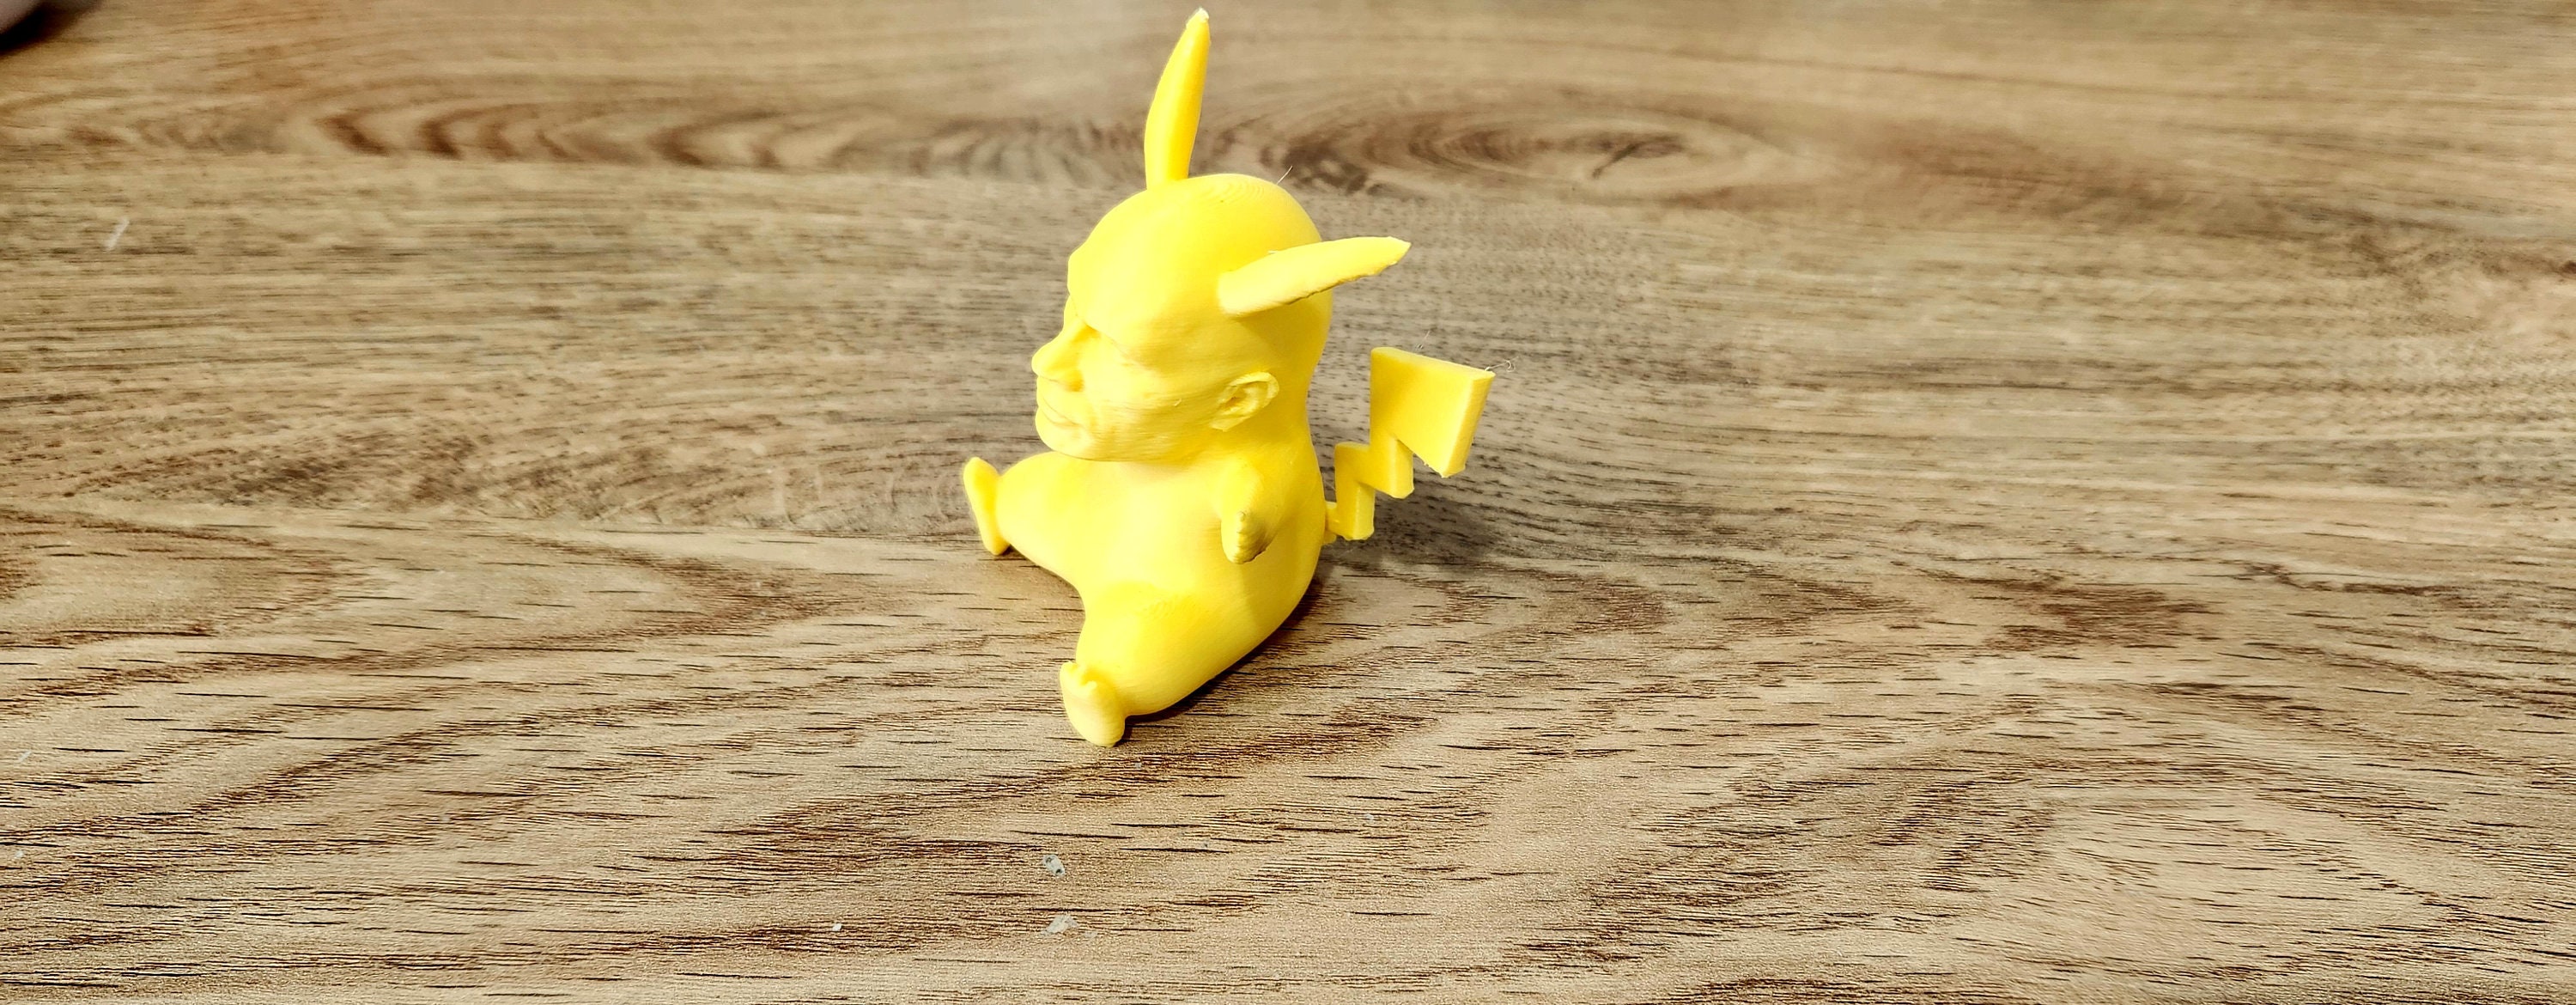 3D Pokemon Yellow fan-remake brings back a truly cursed chonky Pikachu